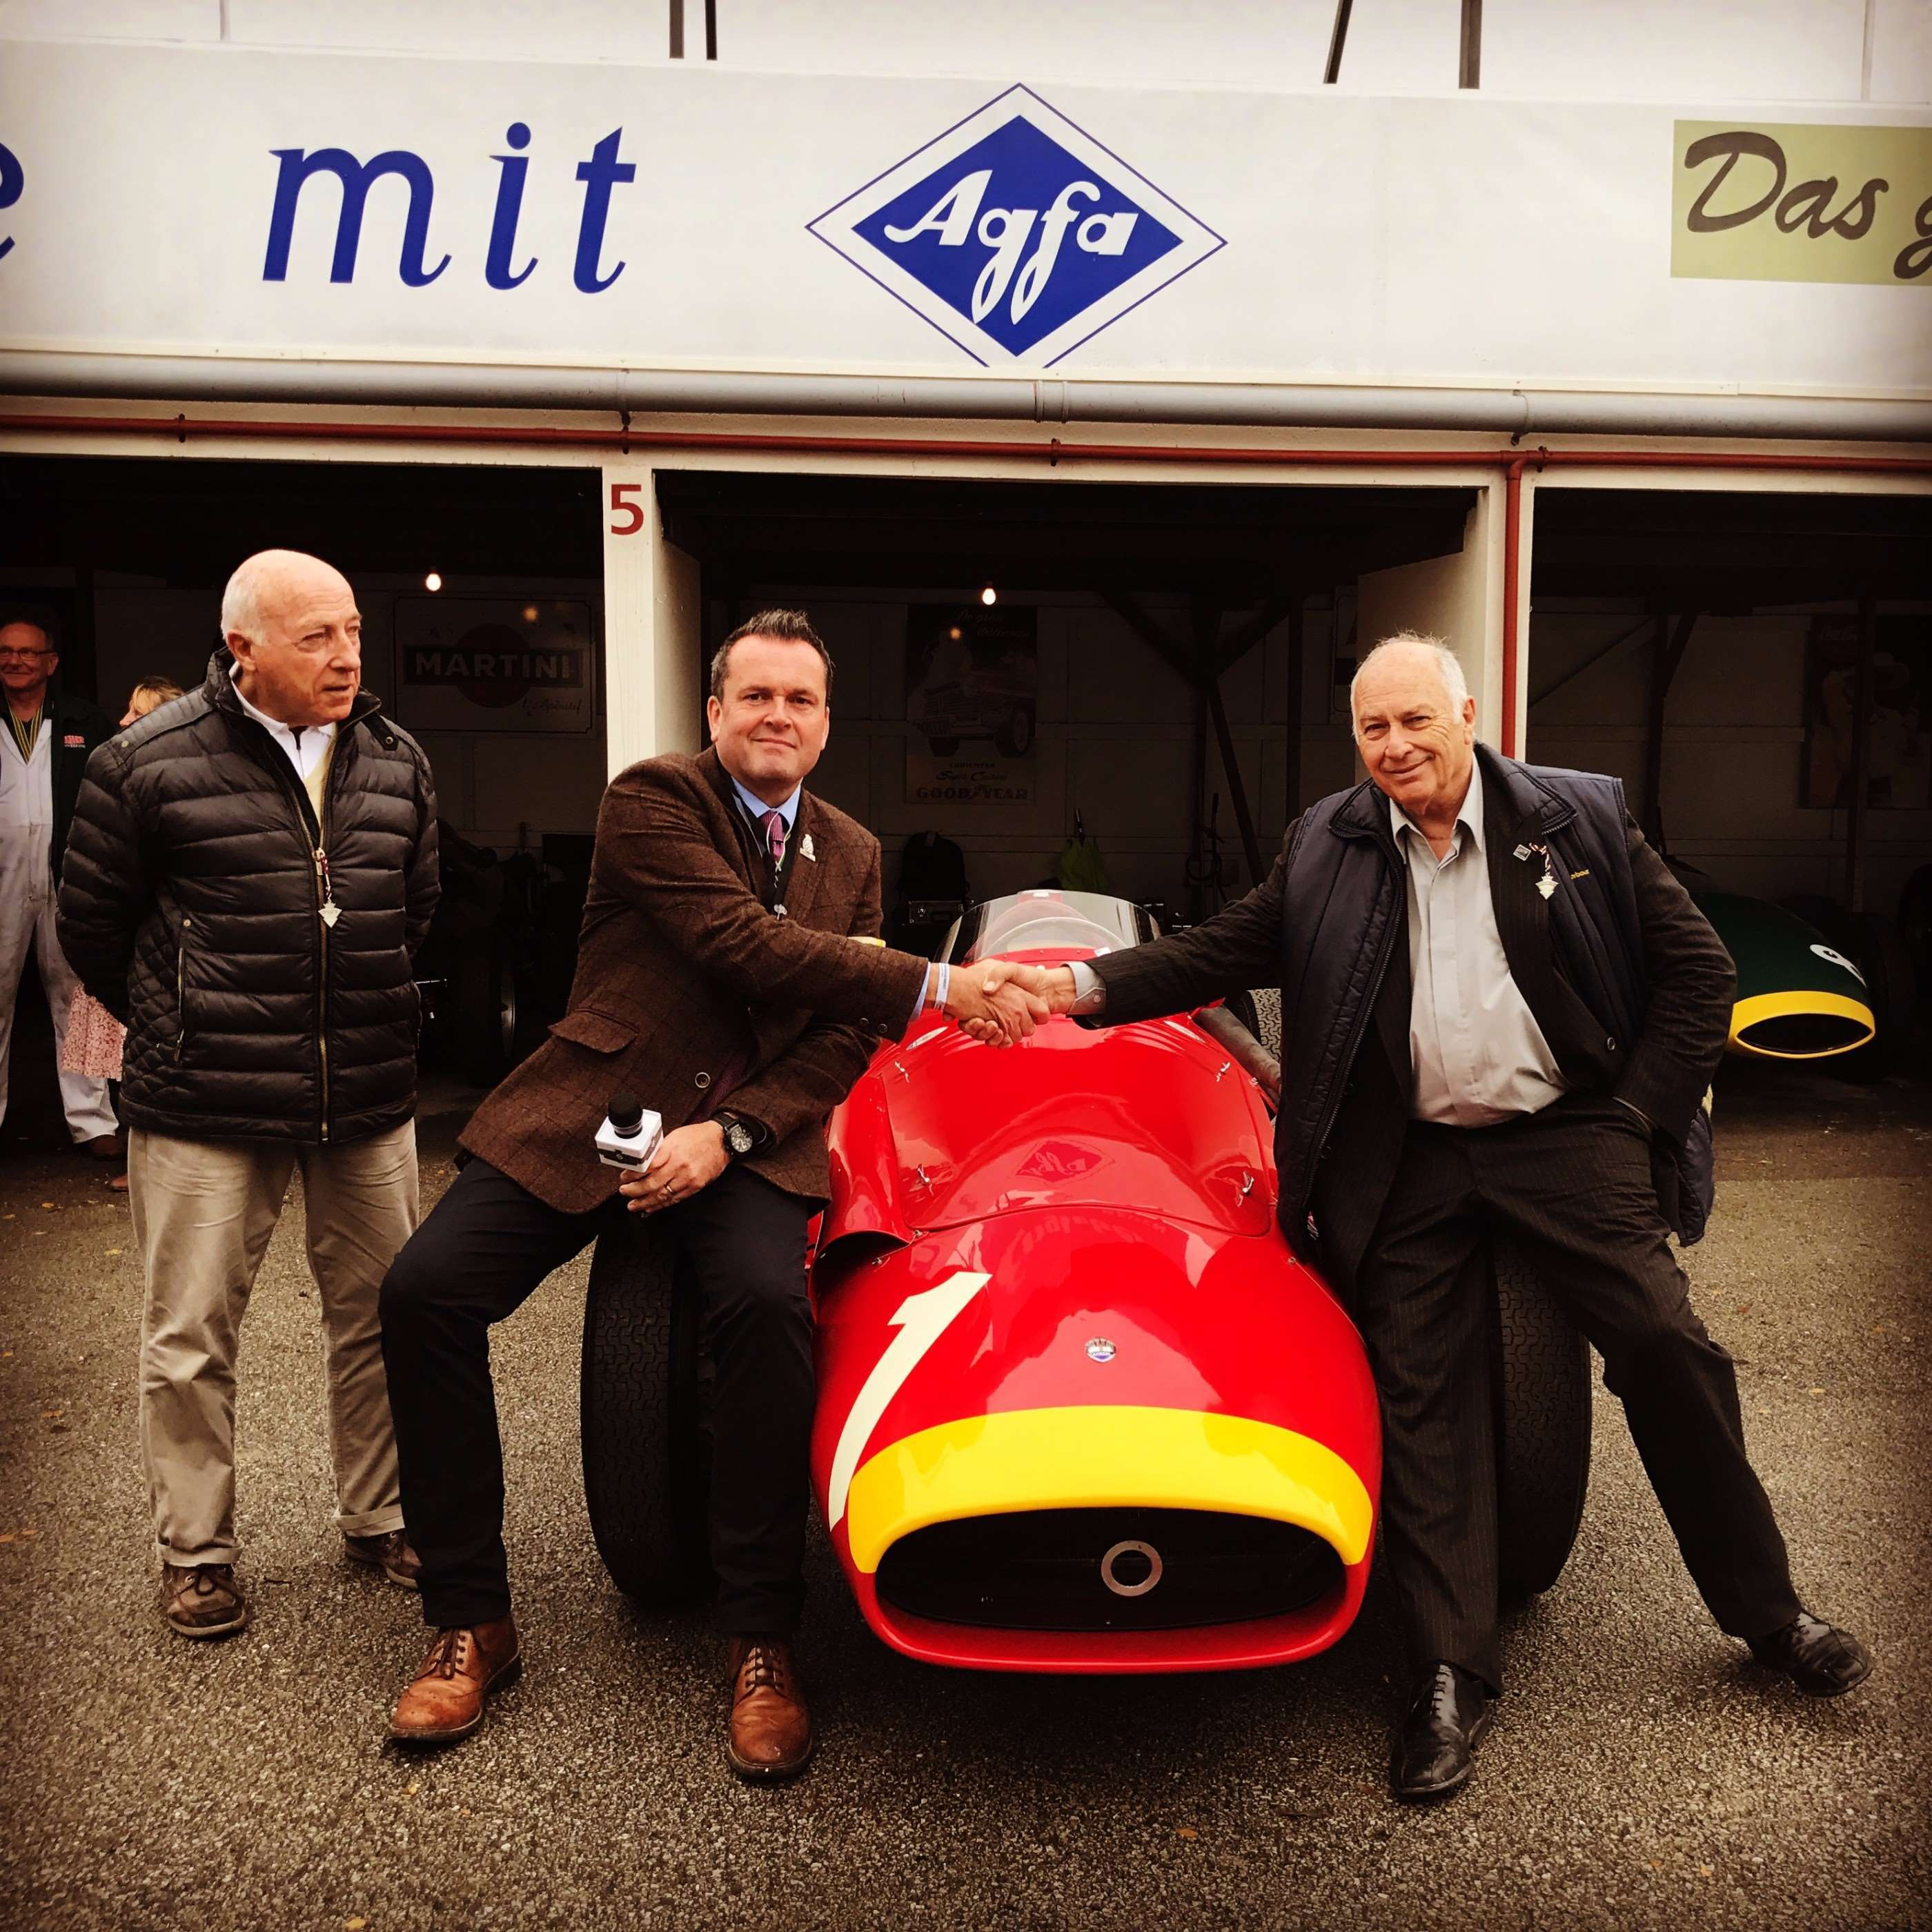 Henry sharing a moment with Fangio's sons - surprise guests at Revival 2017.